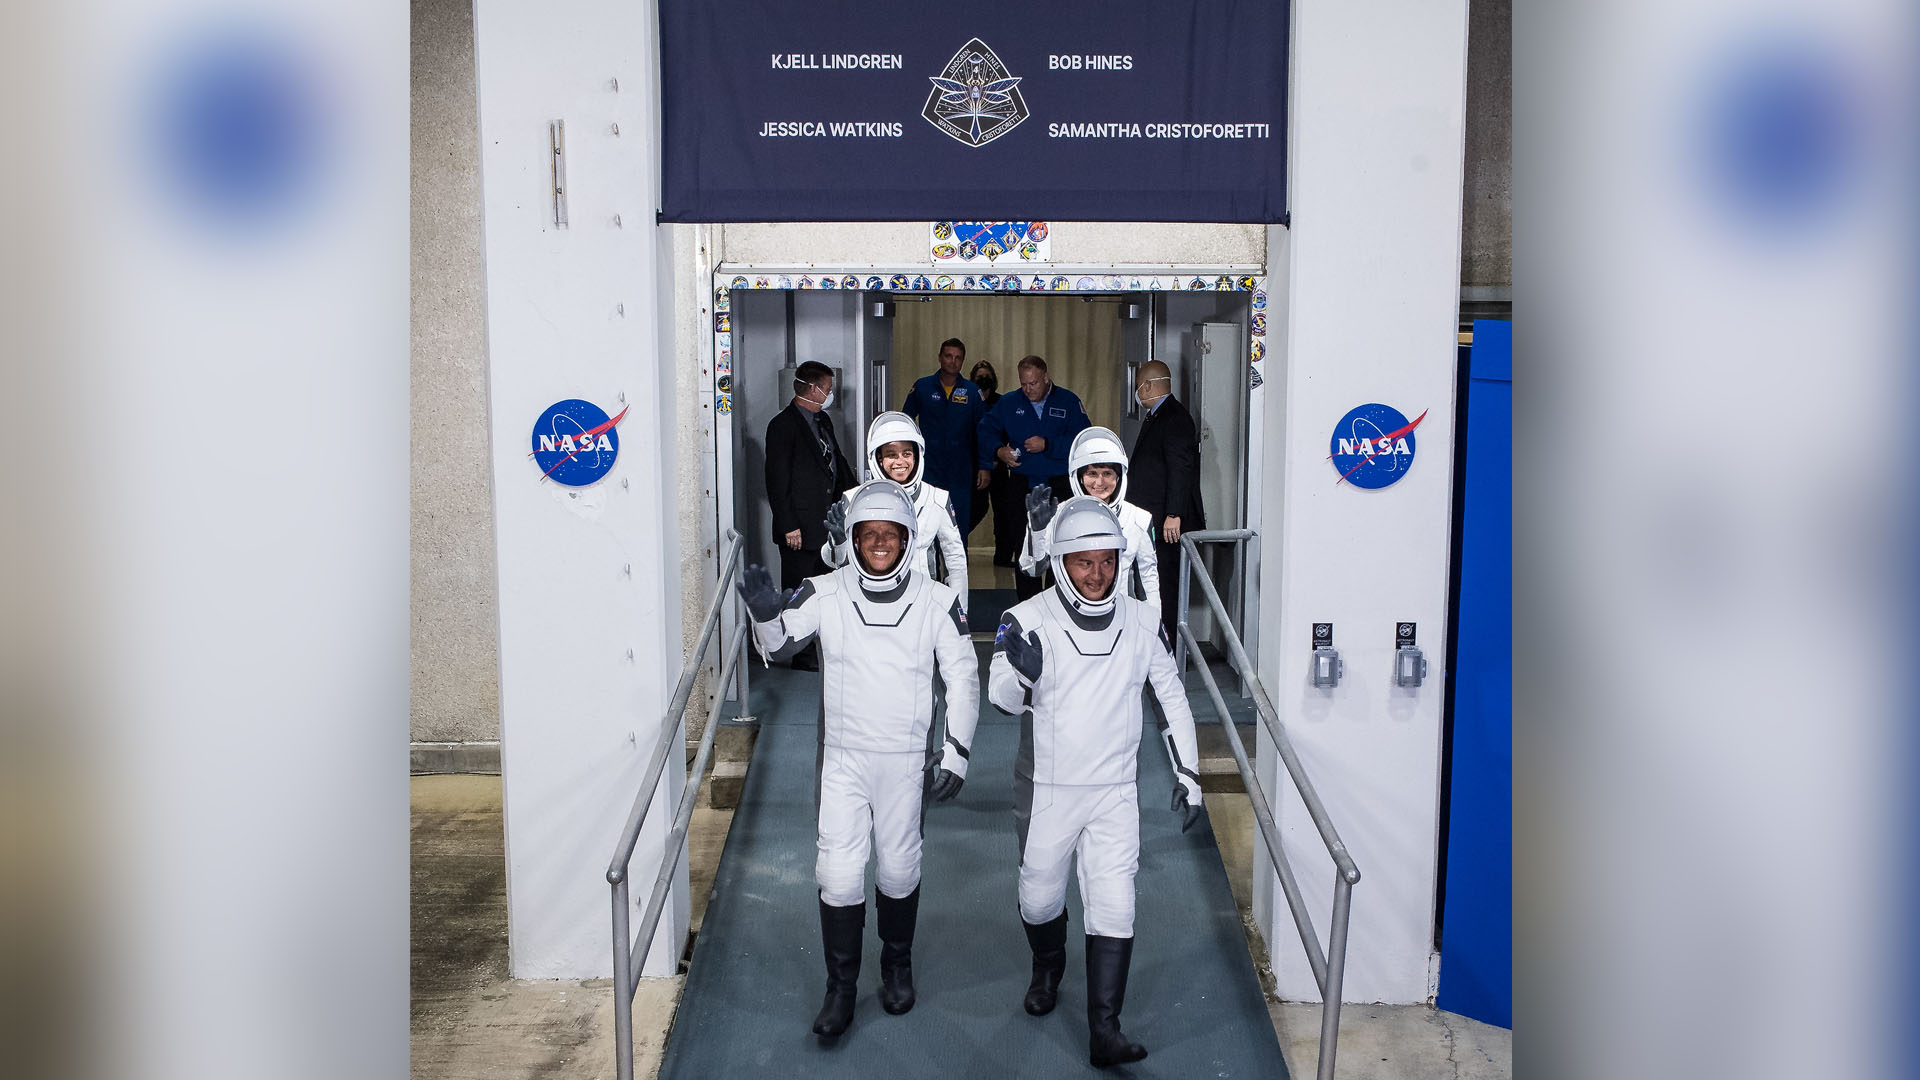 NASA astronauts Robert Hines, left, Kjell Lindgren, right, Jessica Watkins, back left, and ESA (European Space Agency) astronaut Samantha Cristoforetti, wearing SpaceX spacesuits, are seen as they prepare to depart the Neil A. Armstrong Operations and Checkout Building for Launch Complex 39A to board the SpaceX Crew Dragon spacecraft for the Crew-4 mission launch, Wednesday, April 27, 2022, at NASA's Kennedy Space Center in Florida.